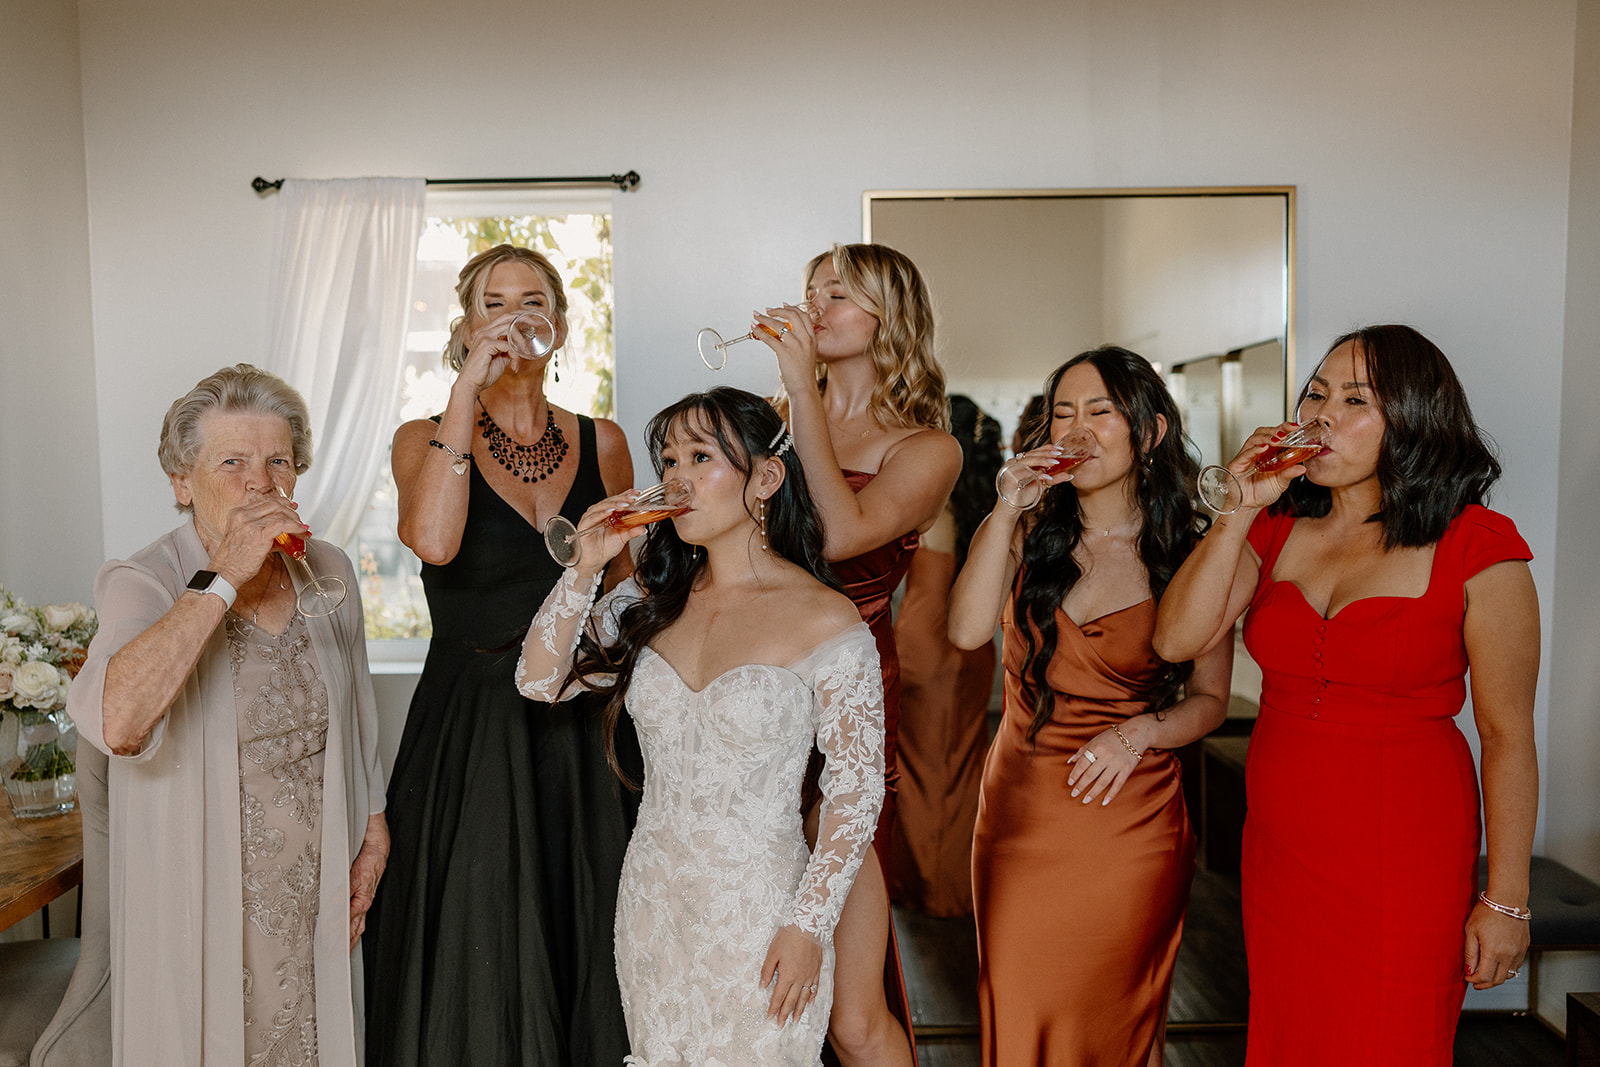 Bride and her wedding party drinks a glass of wine in preparation for her stunning wedding day